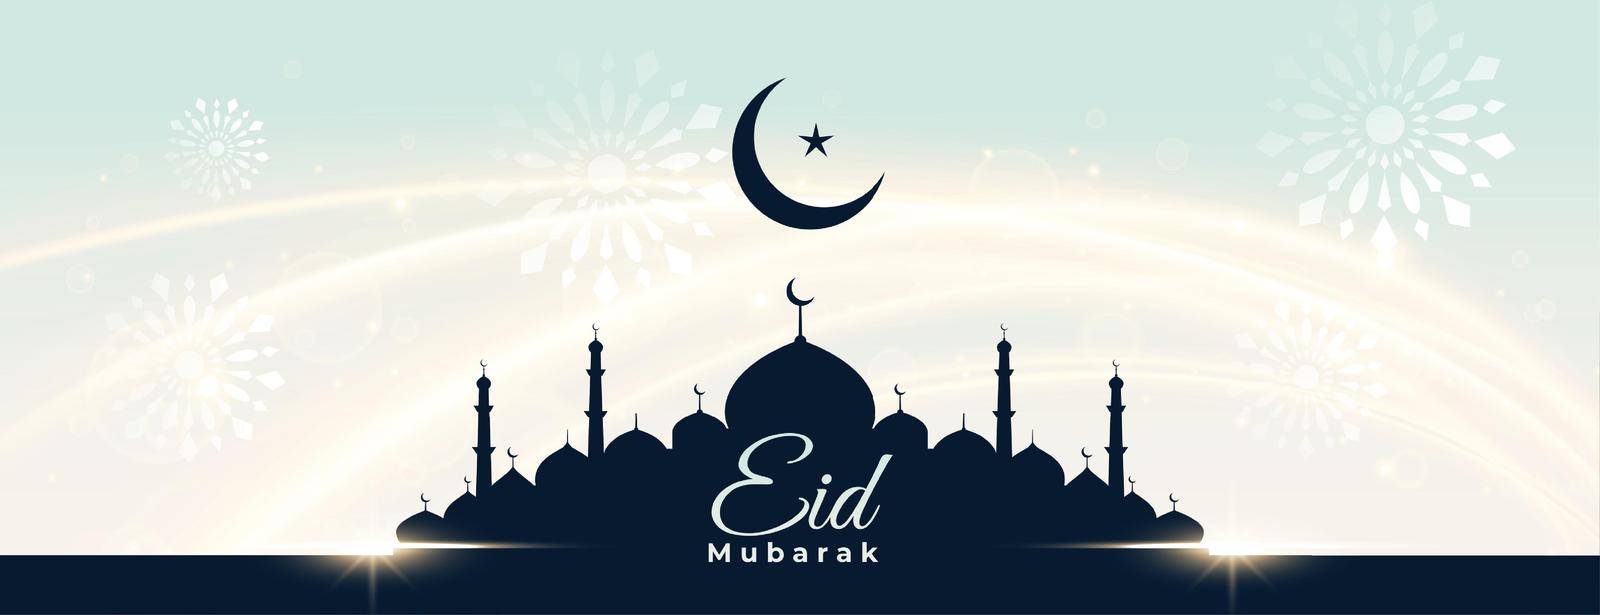 islamic eid mubarak festival banner with mosque and moon design